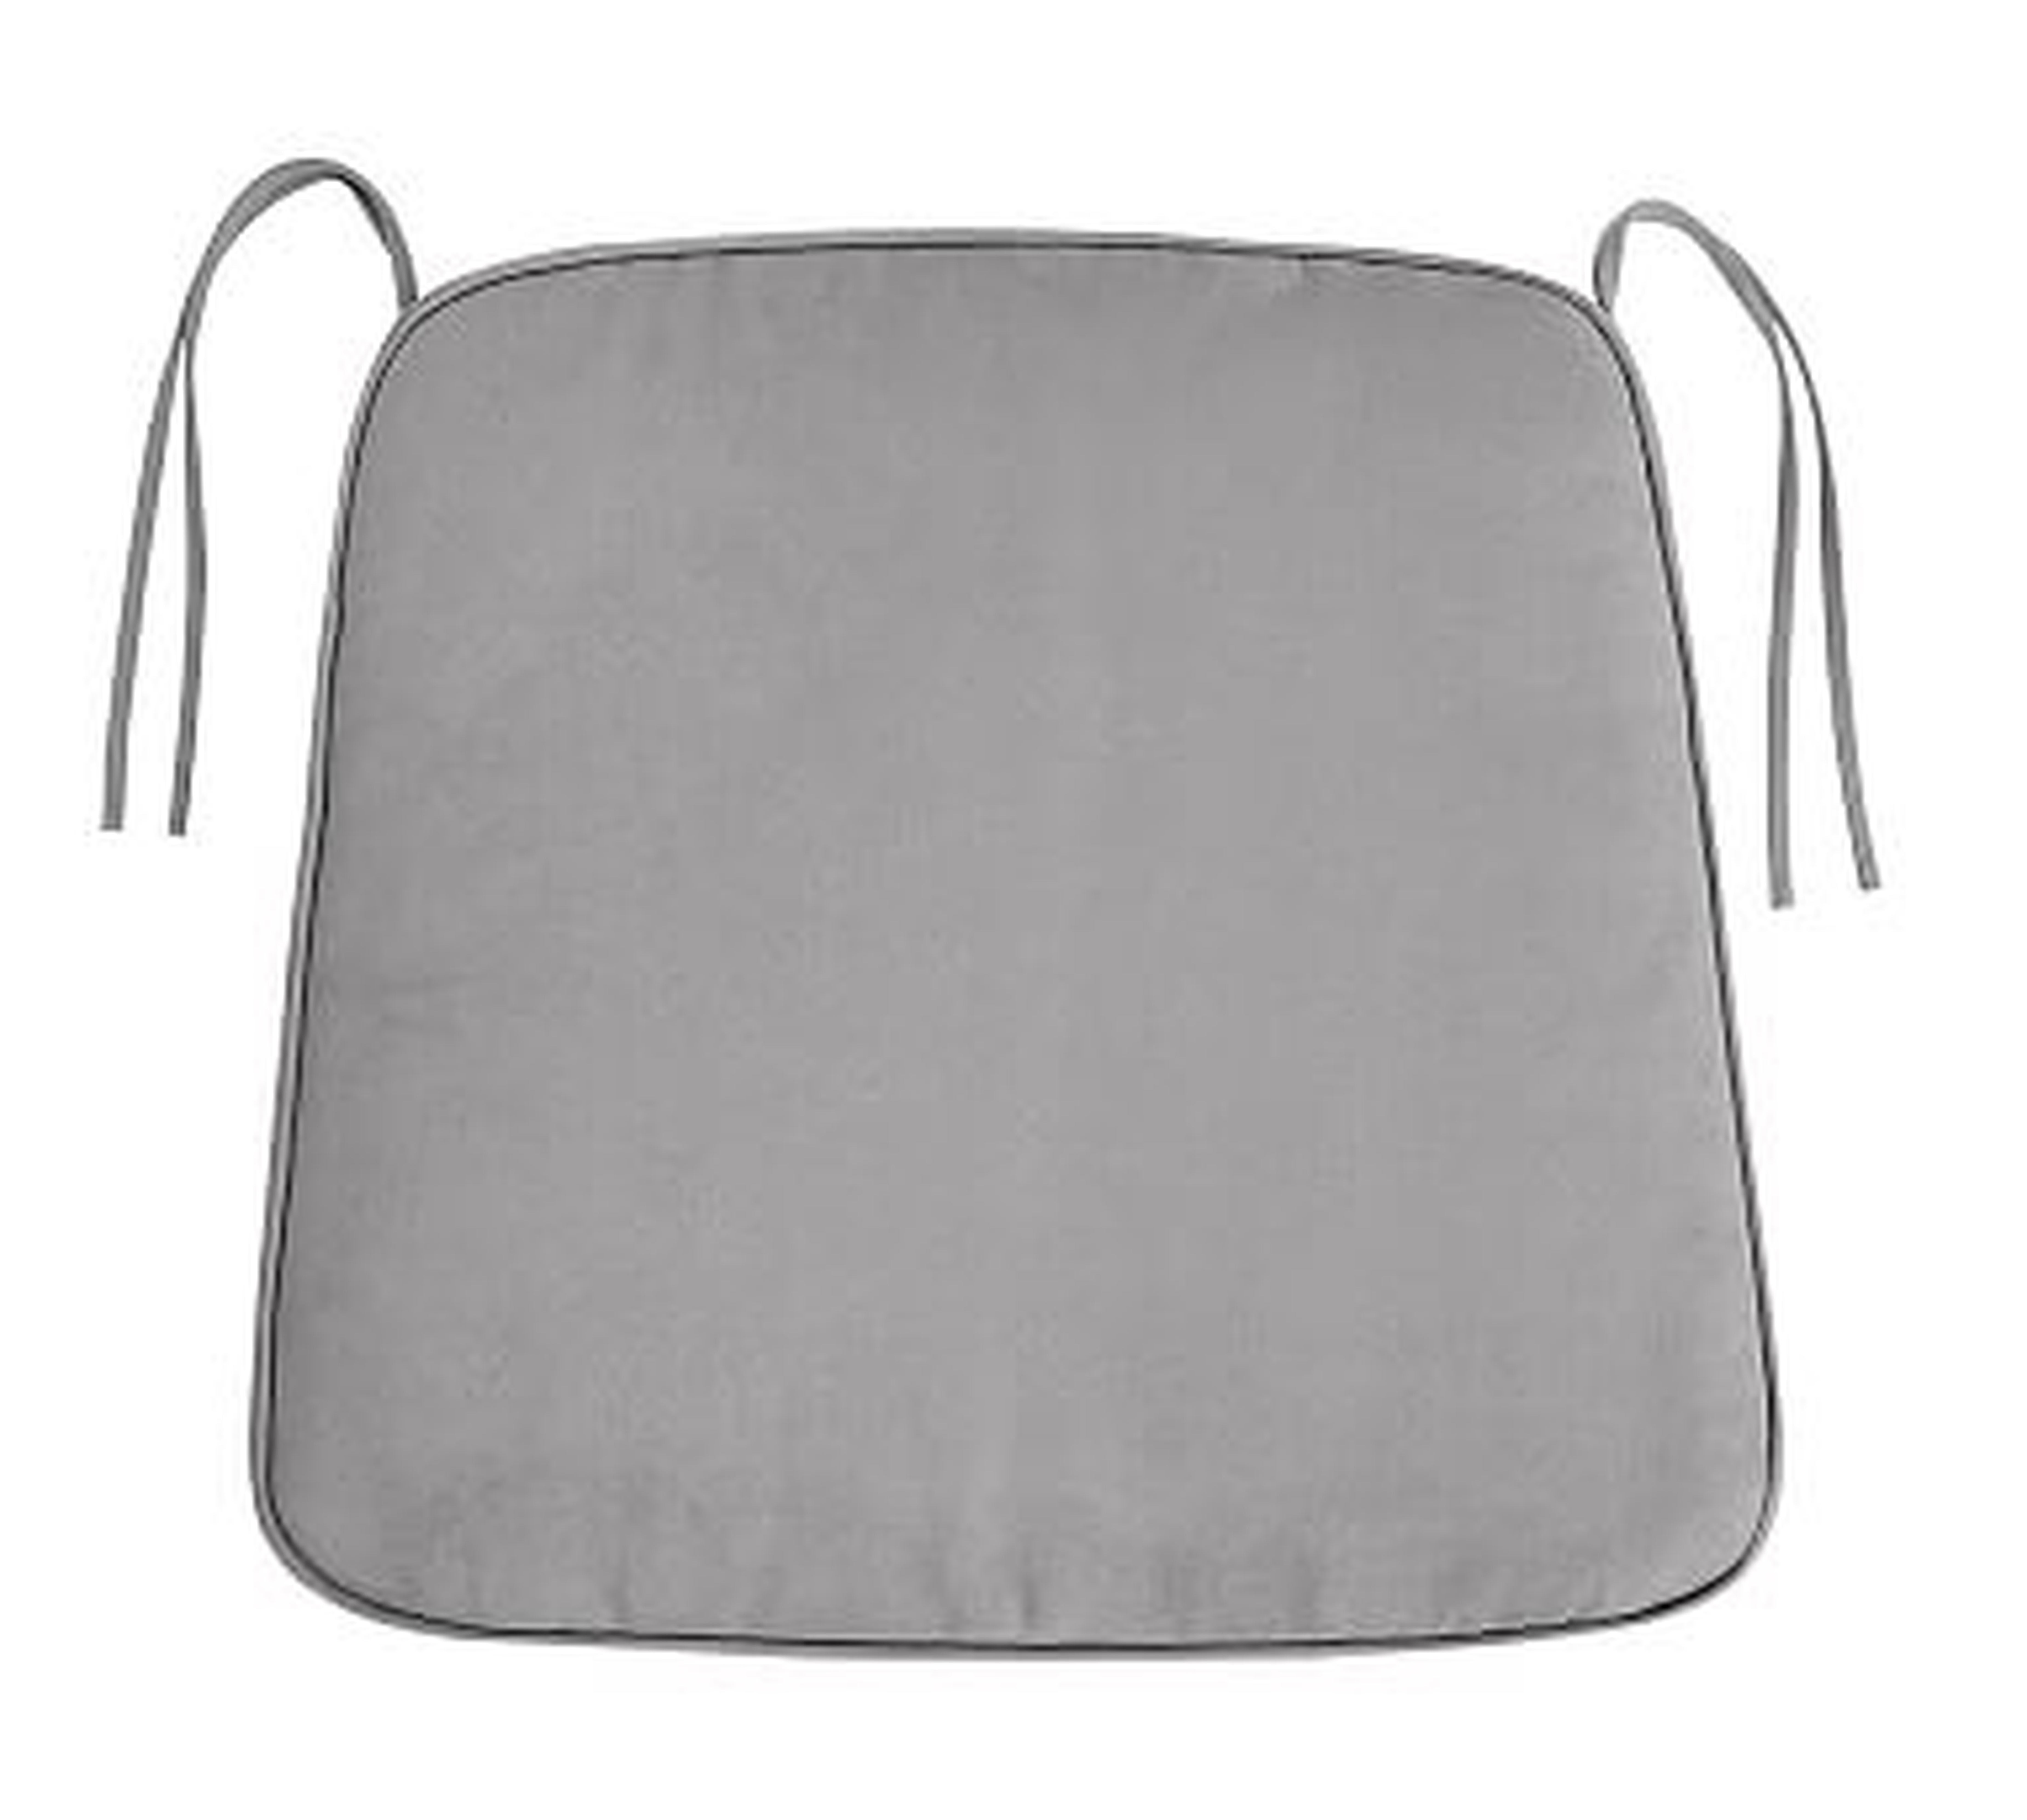 PB Classic Dining Chair Cushion, Small, Performance Everydaysuede(TM) Metal Gray - Pottery Barn